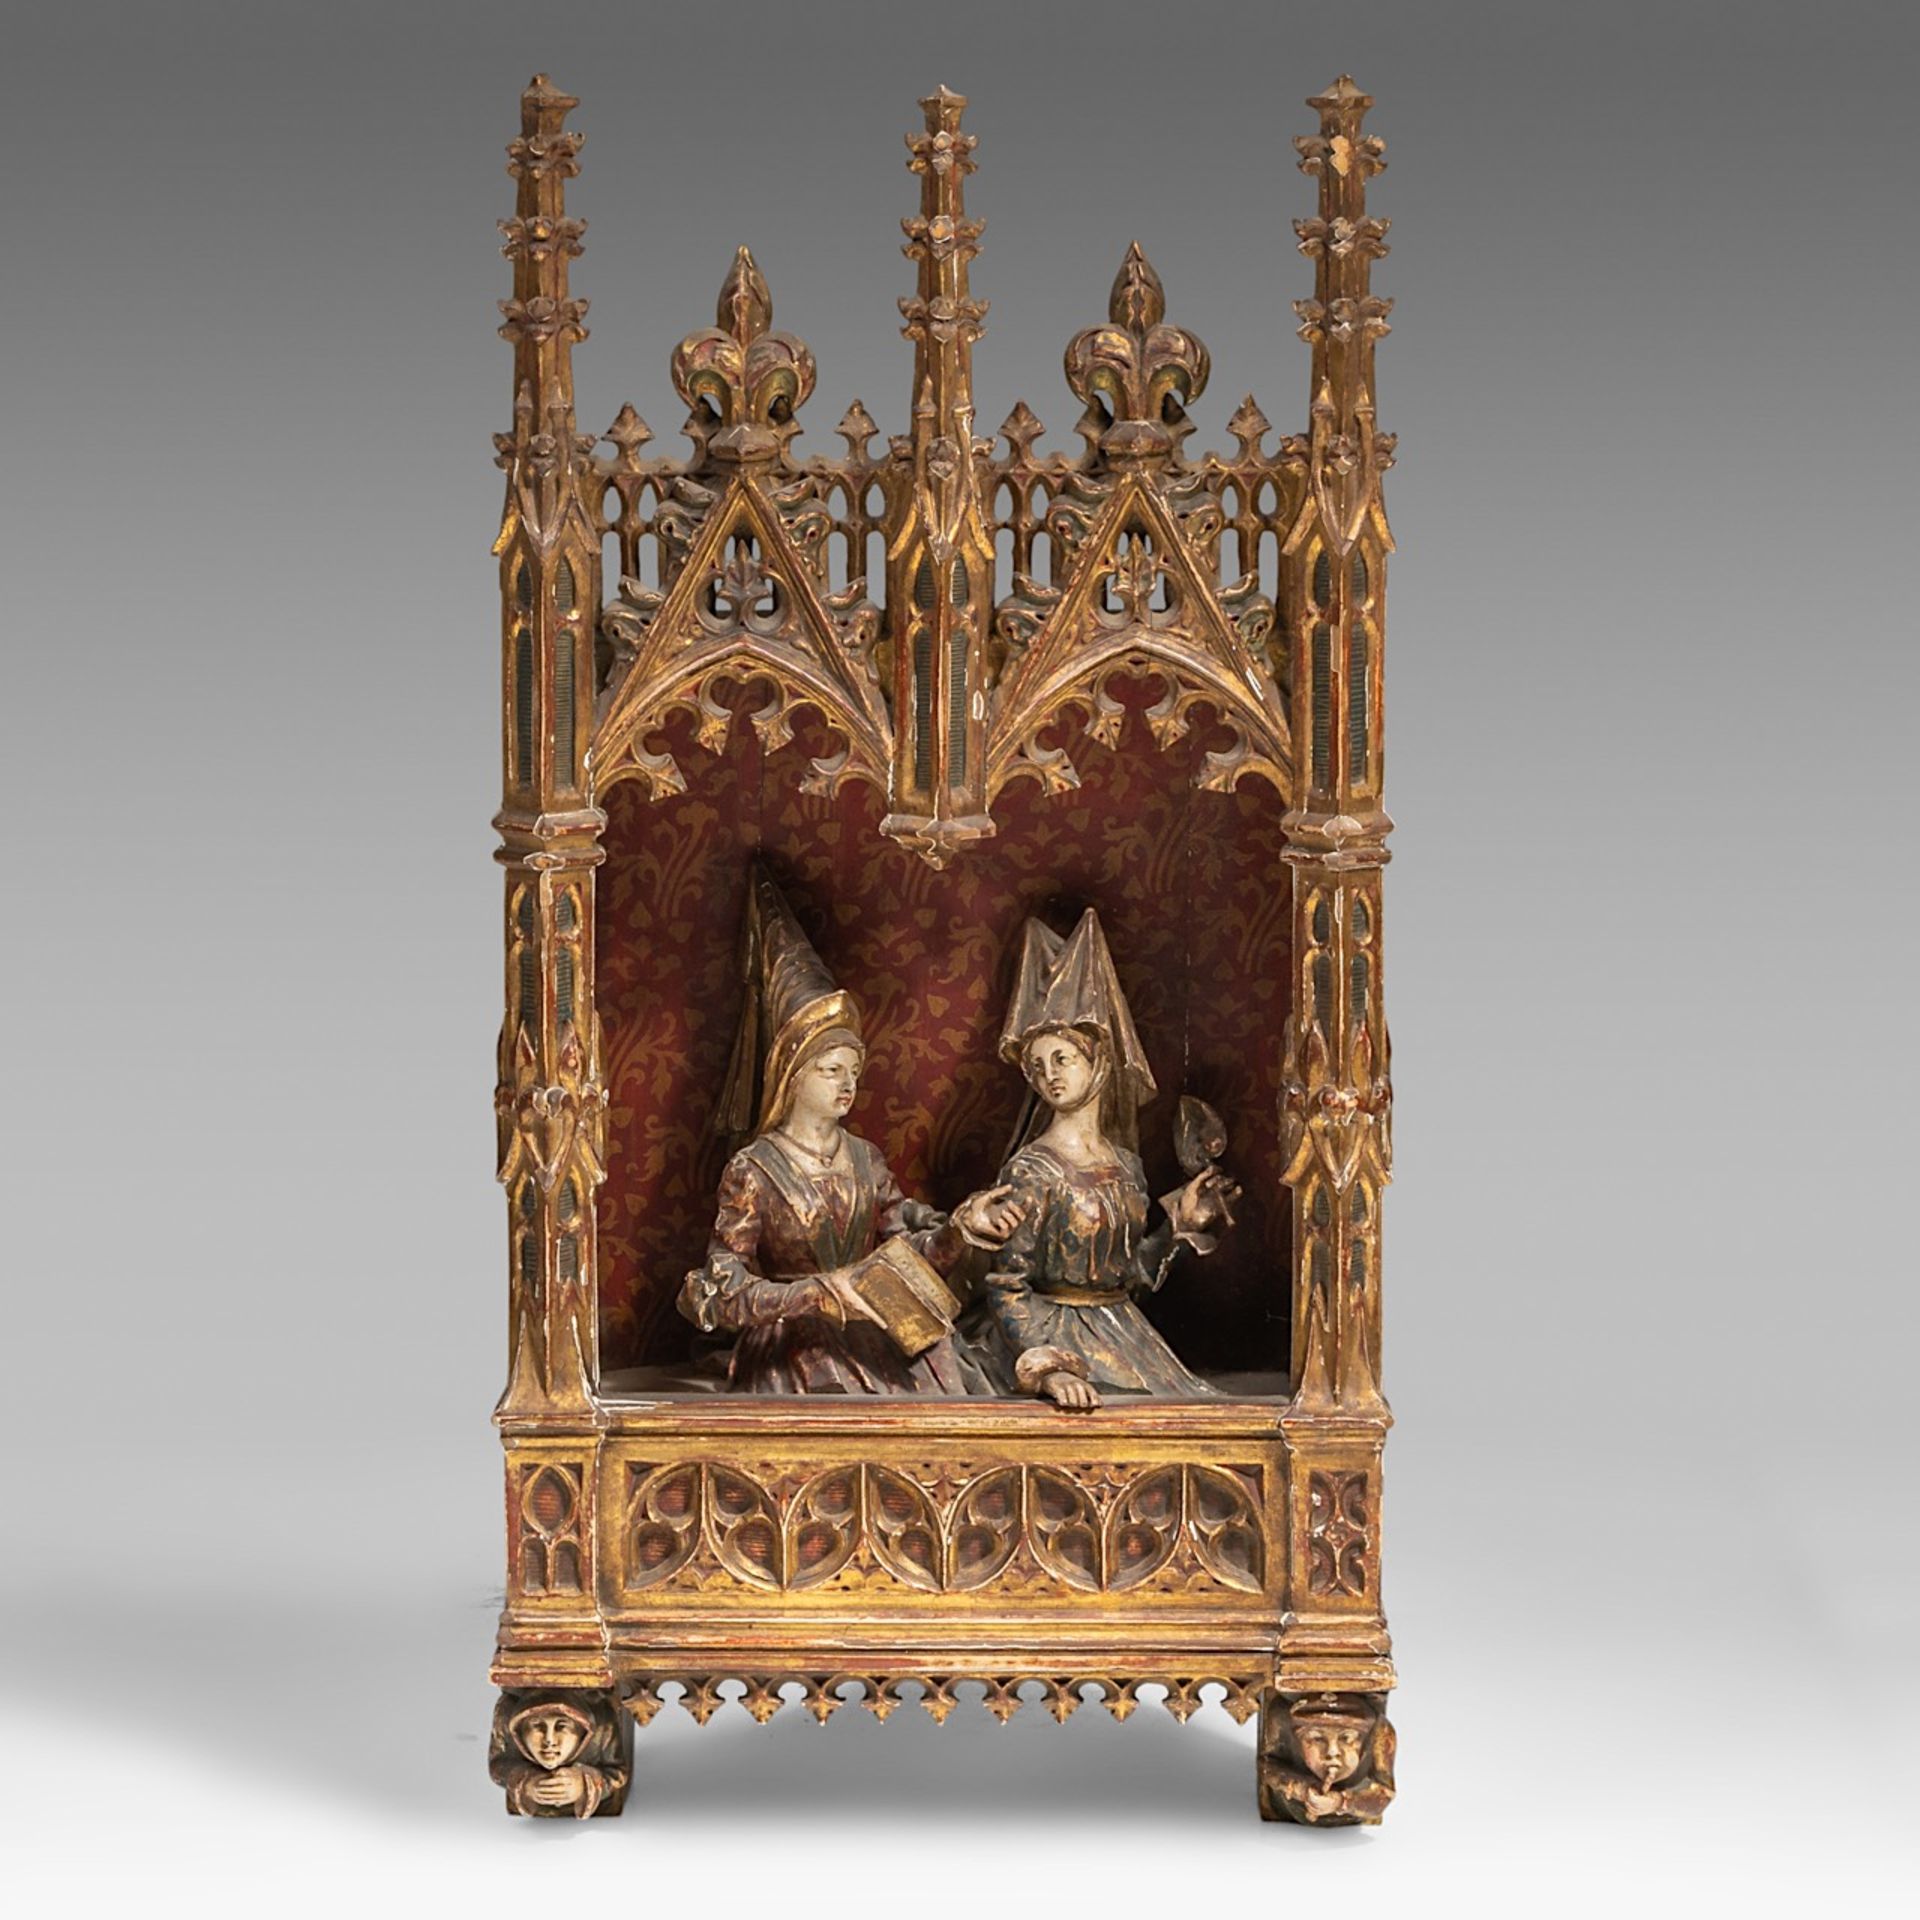 A finely sculpted polychrome and gilt wooden Gothic Revival shrine with a medieval court scene, H 80